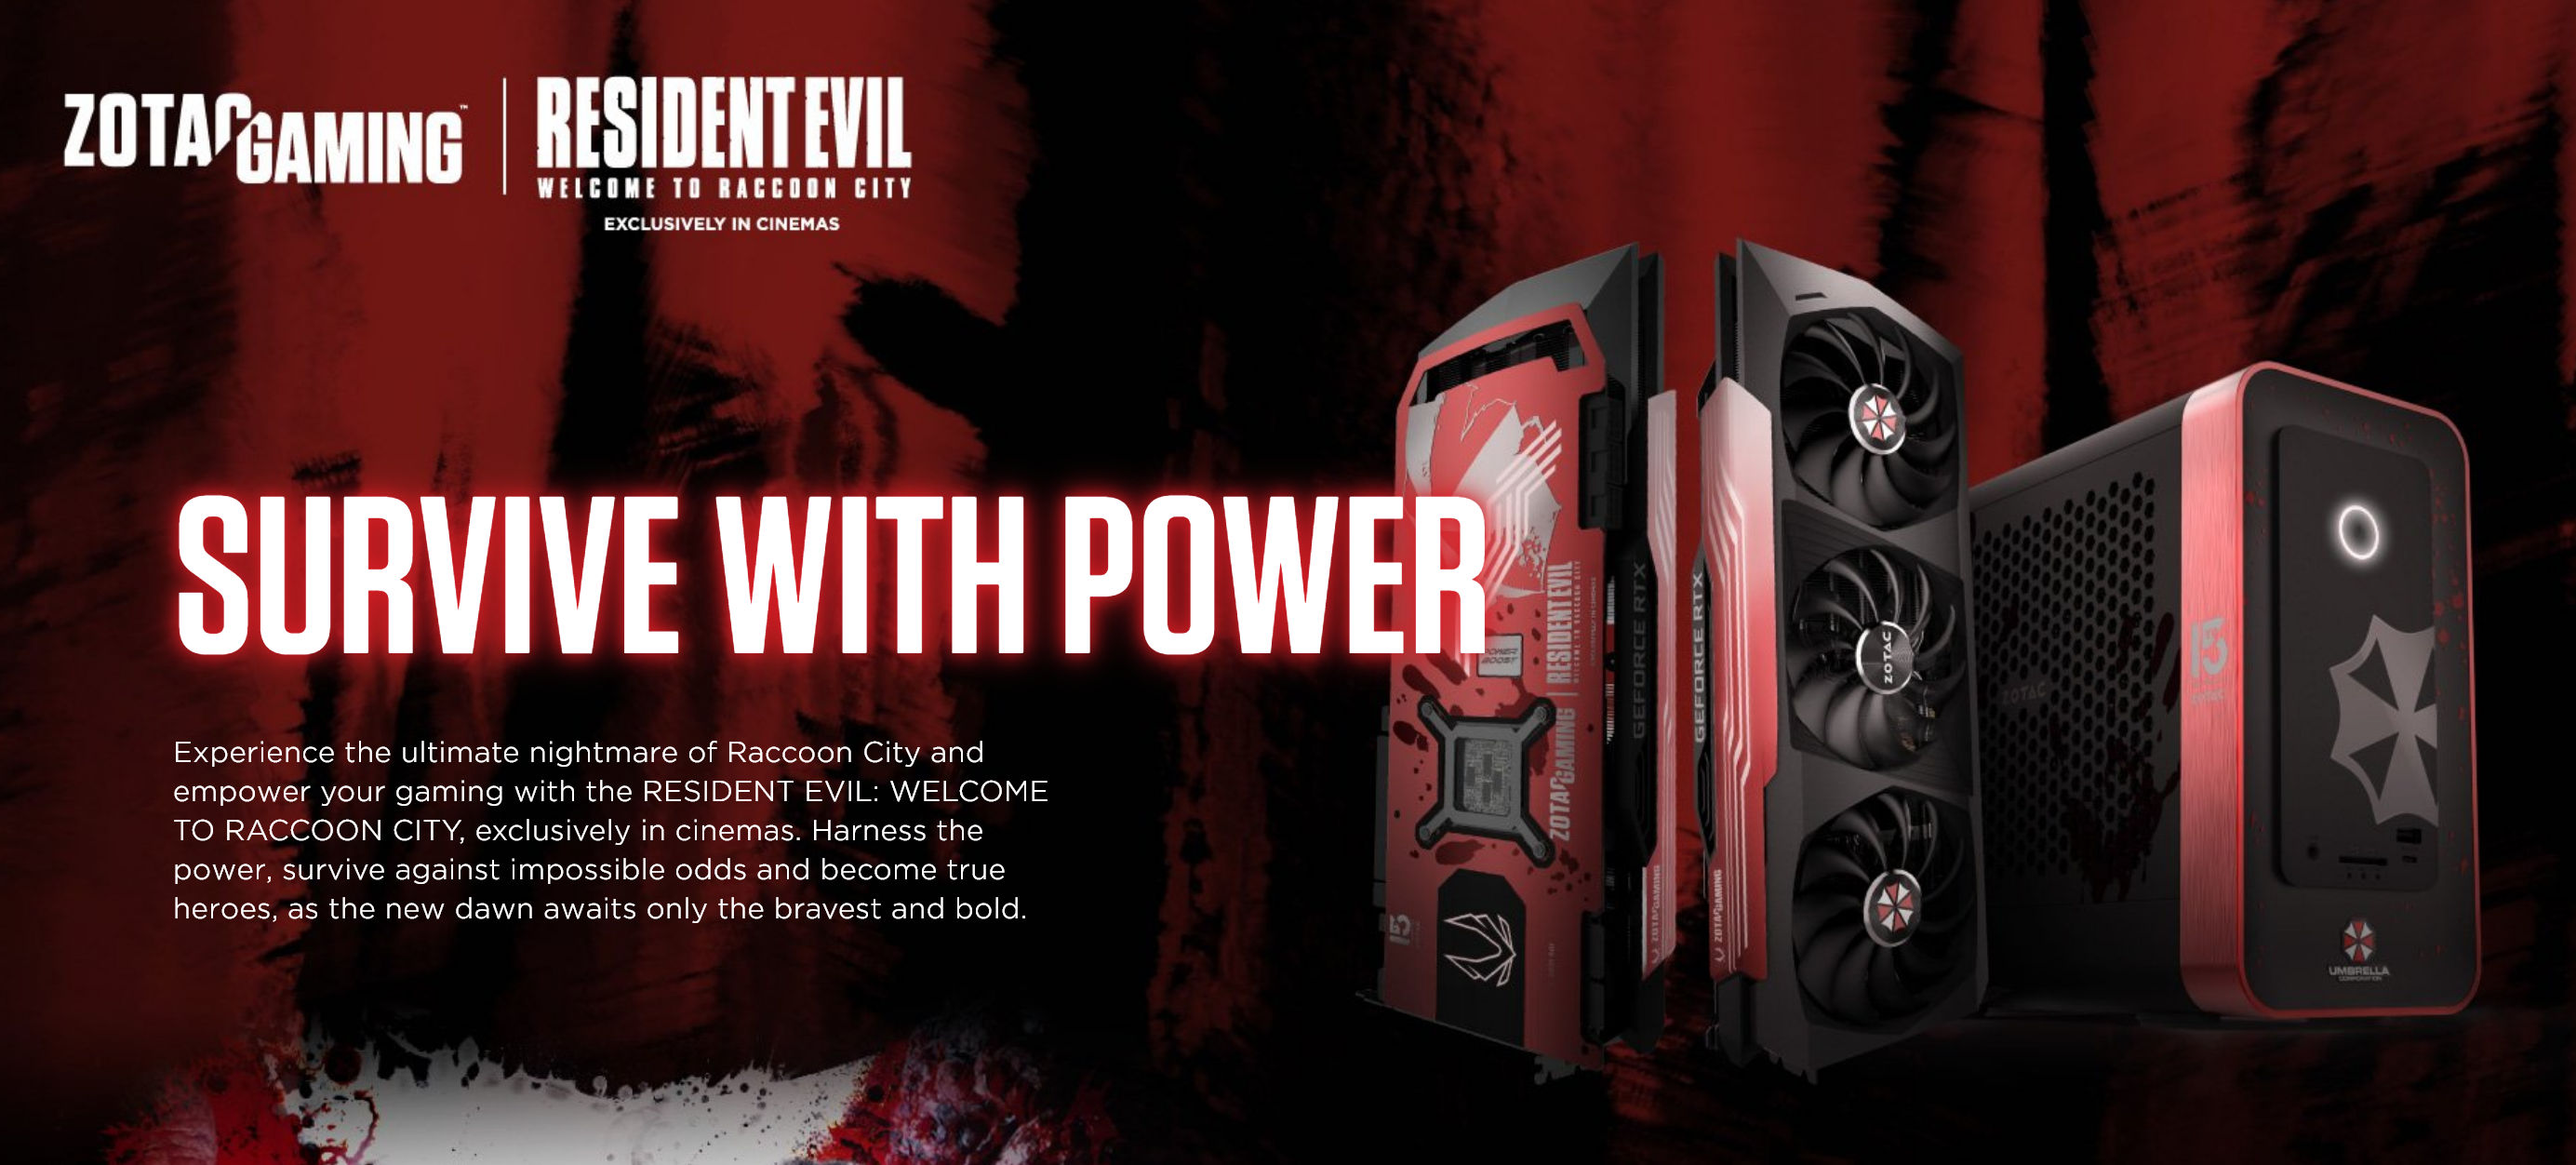 Zotac is giving away a Resident Evil-themed Mini PC, RTX 3070 Ti